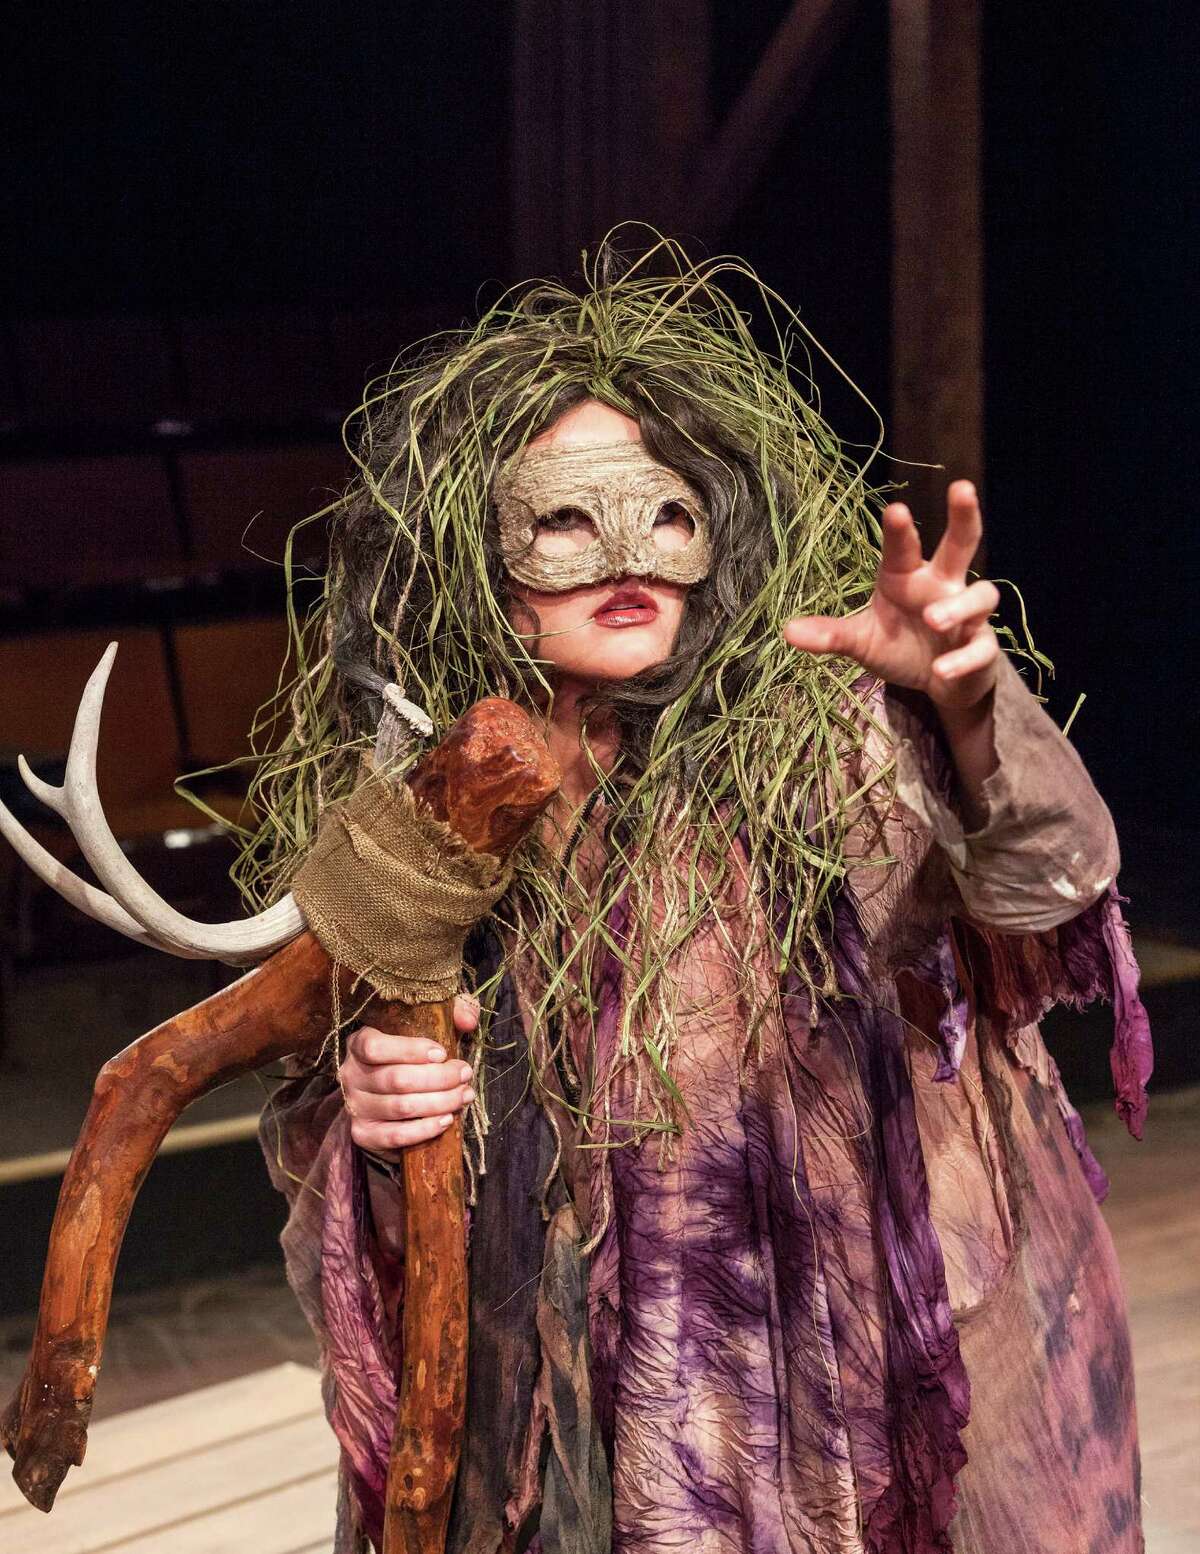 Christina Stroup says the character of the Witch in Stephen Sondheim's "Into the Woods" starts off as a typical fairy-tale witch but progresses into a human being.